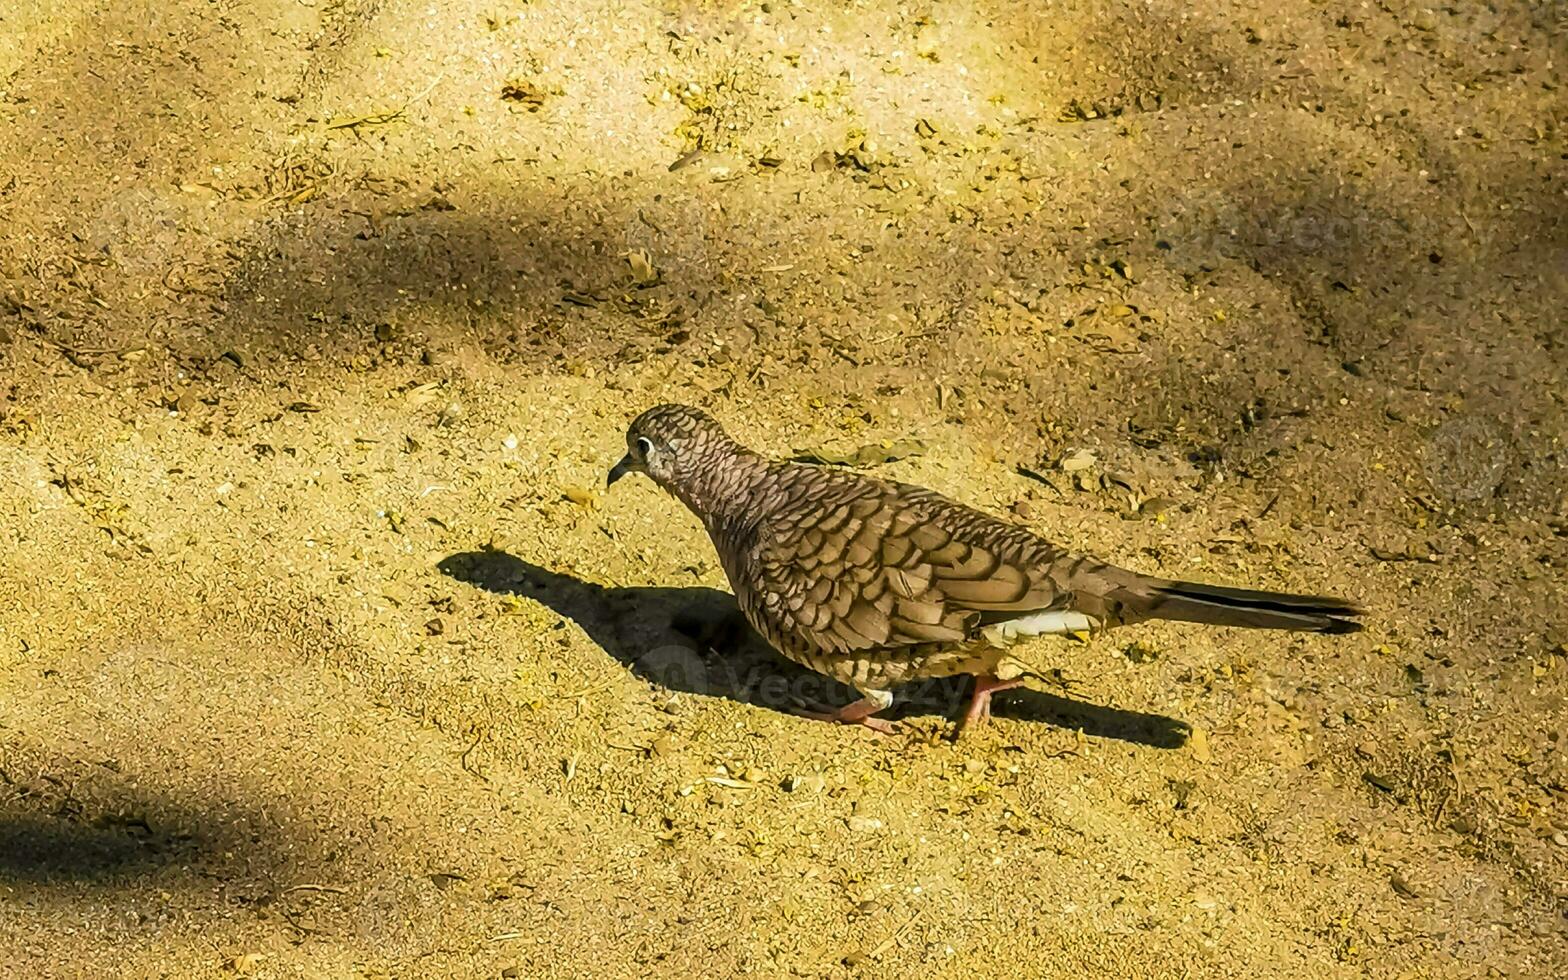 Ruddy ground doves dove birds peck for food in Mexico. photo